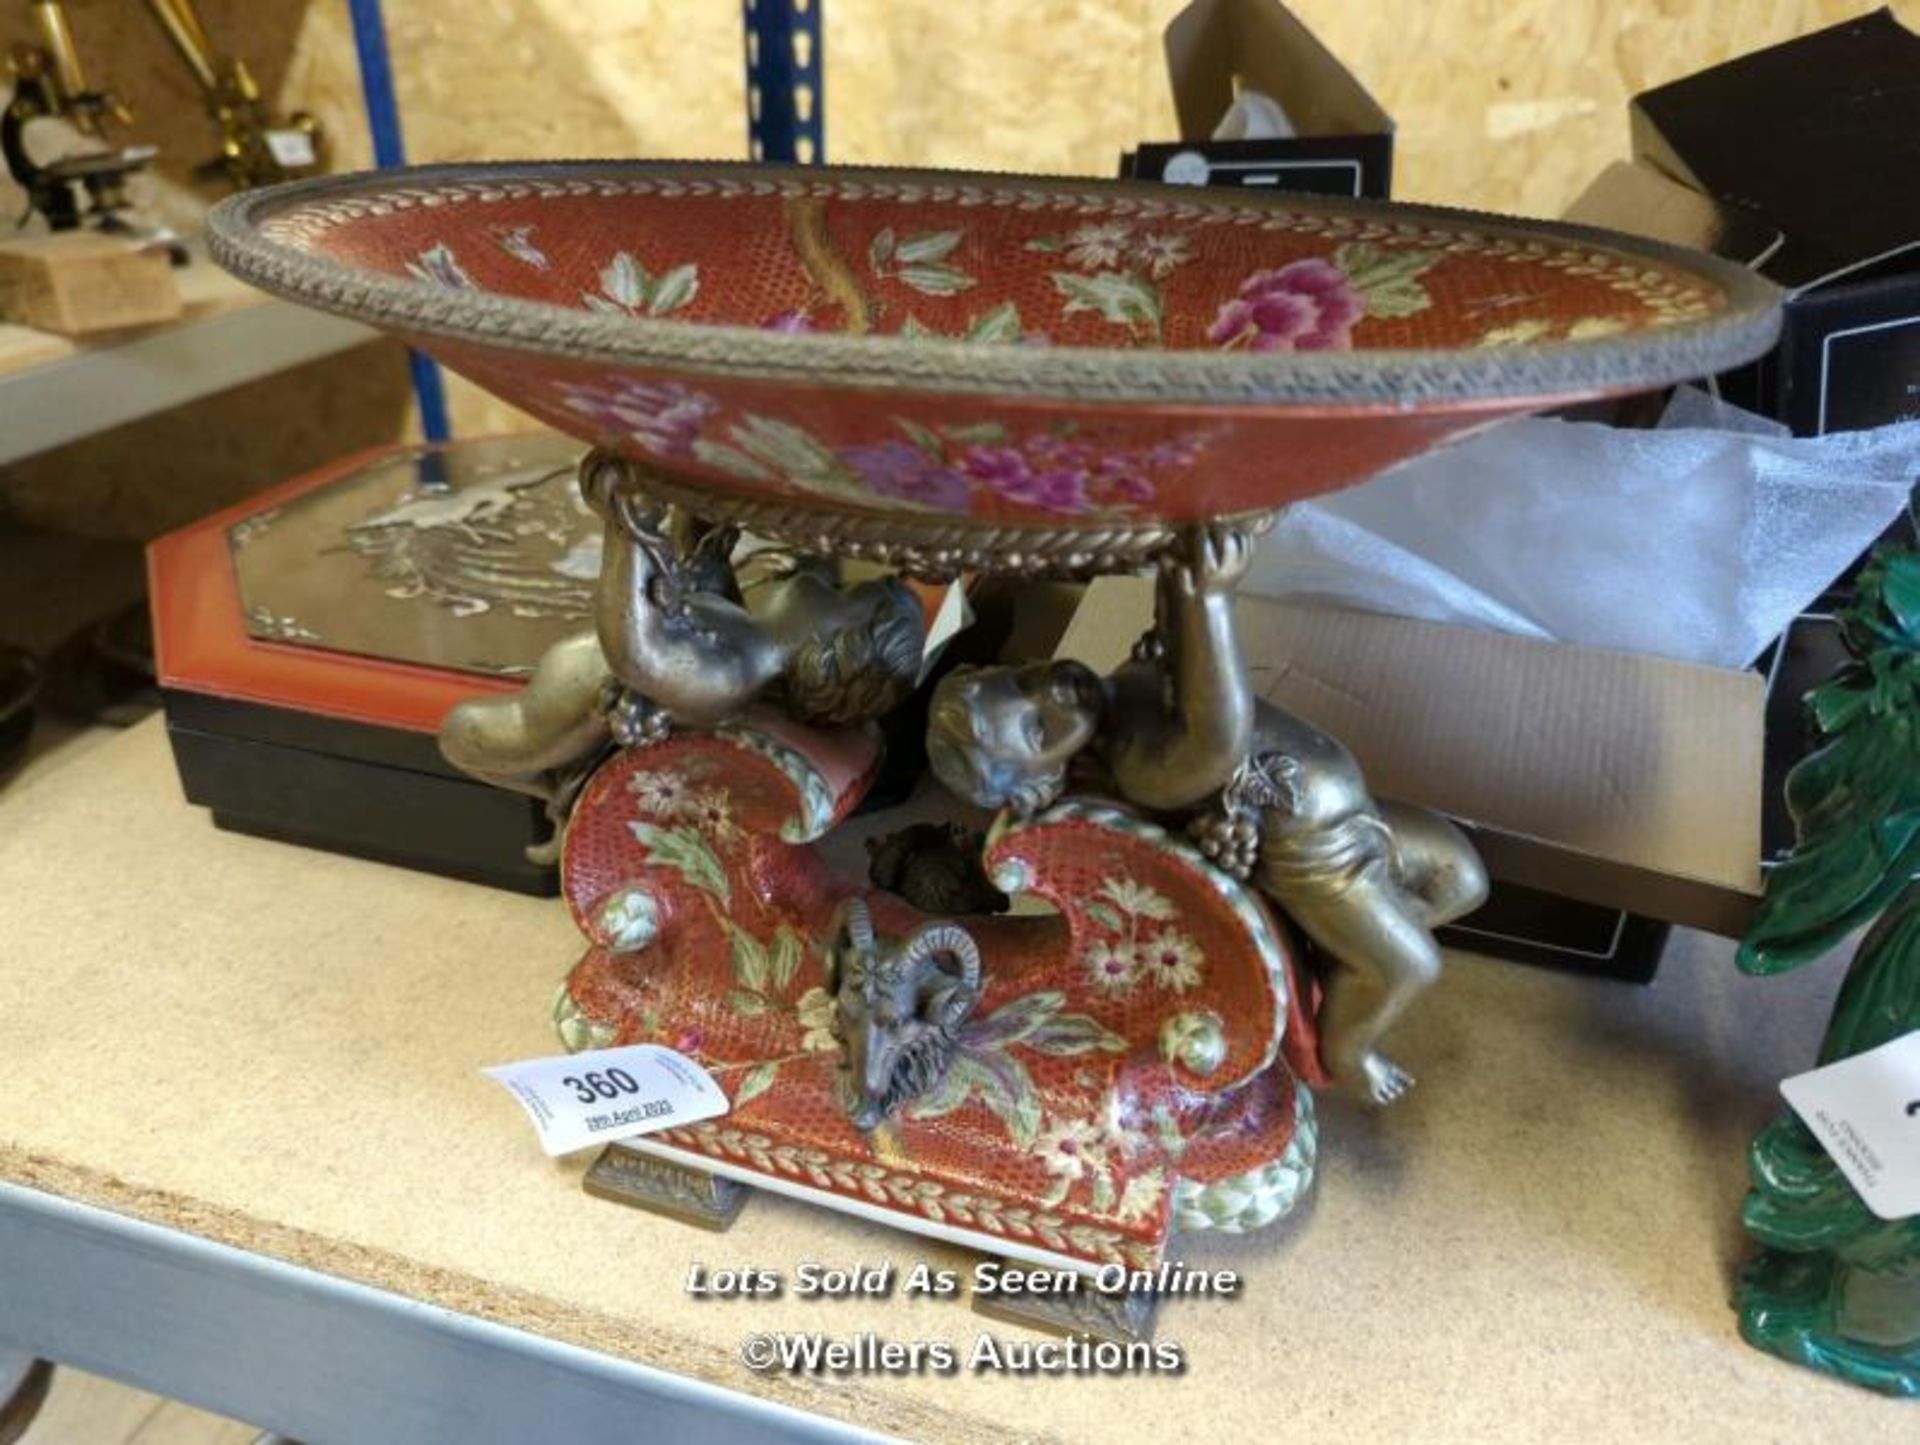 *DECORATIVE CENTERPIECE WITH FLORAL DESIGN, BRASS CHERUBS AND A GOAT / ALL LOTS ARE LOCATED AT